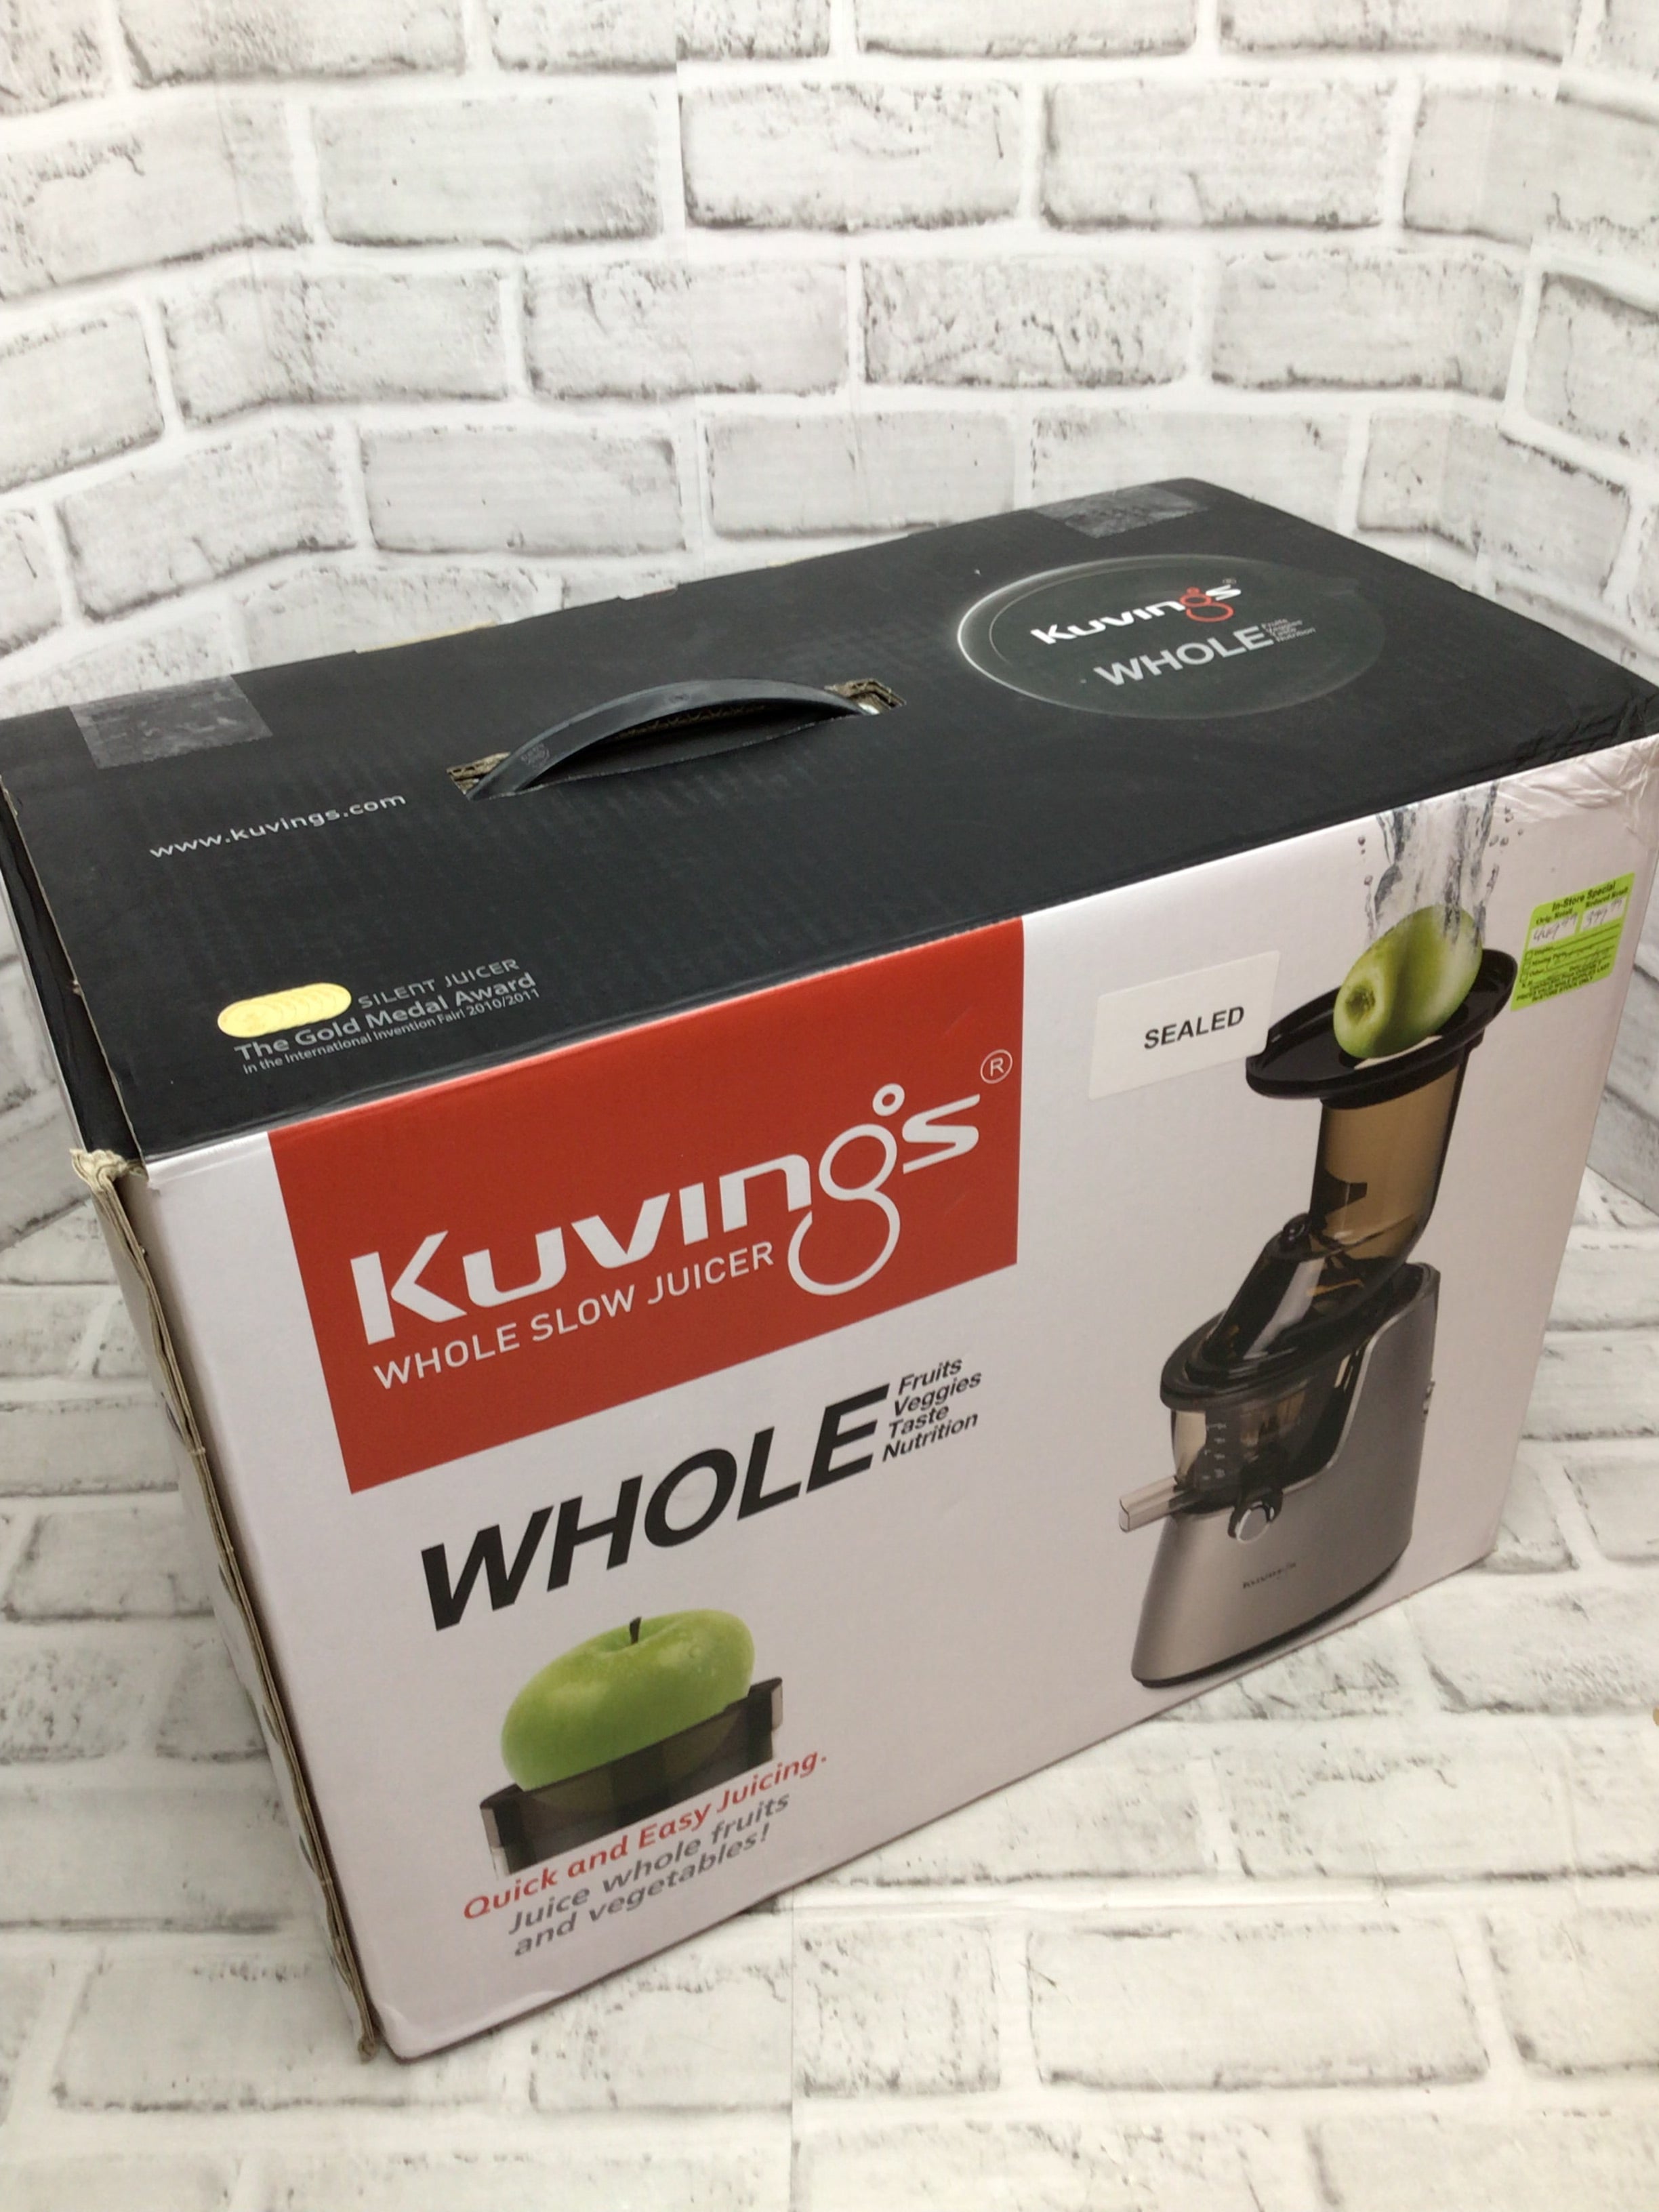 Kuvings C7000S (ULD-732NB) 240W Whole Slow Juicer, Silver *OPEN BOX NEVER USED* (8171690918126)